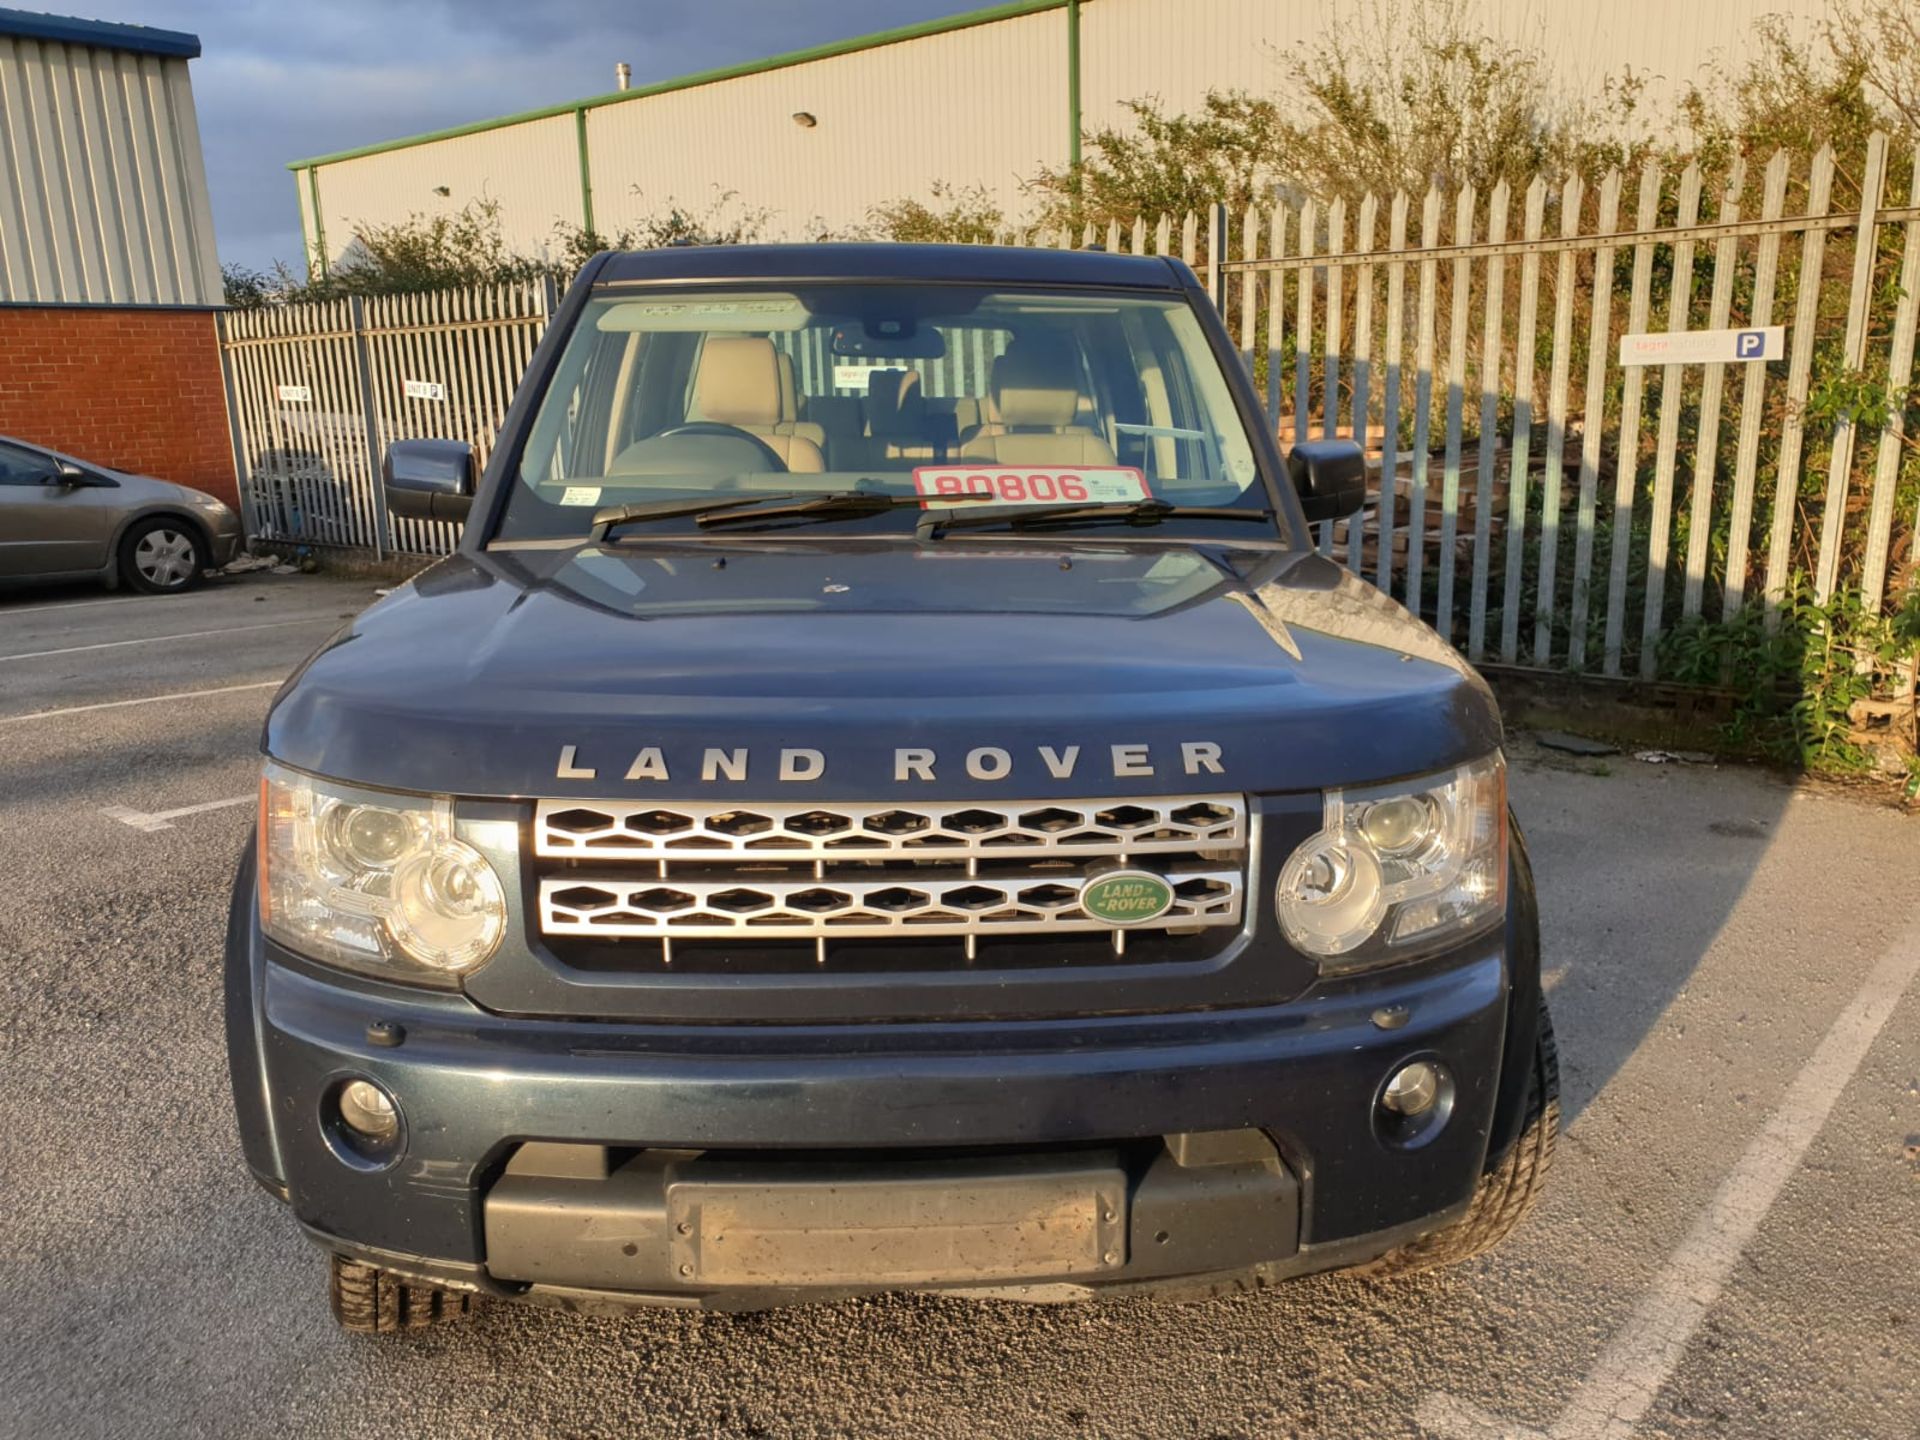 2010/10 REG LAND ROVER DISCOVERY XS TDV6 AUTO 3.0 DIESEL BLUE 4X4, SHOWING 2 FORMER KEEPERS *NO VAT* - Image 2 of 11